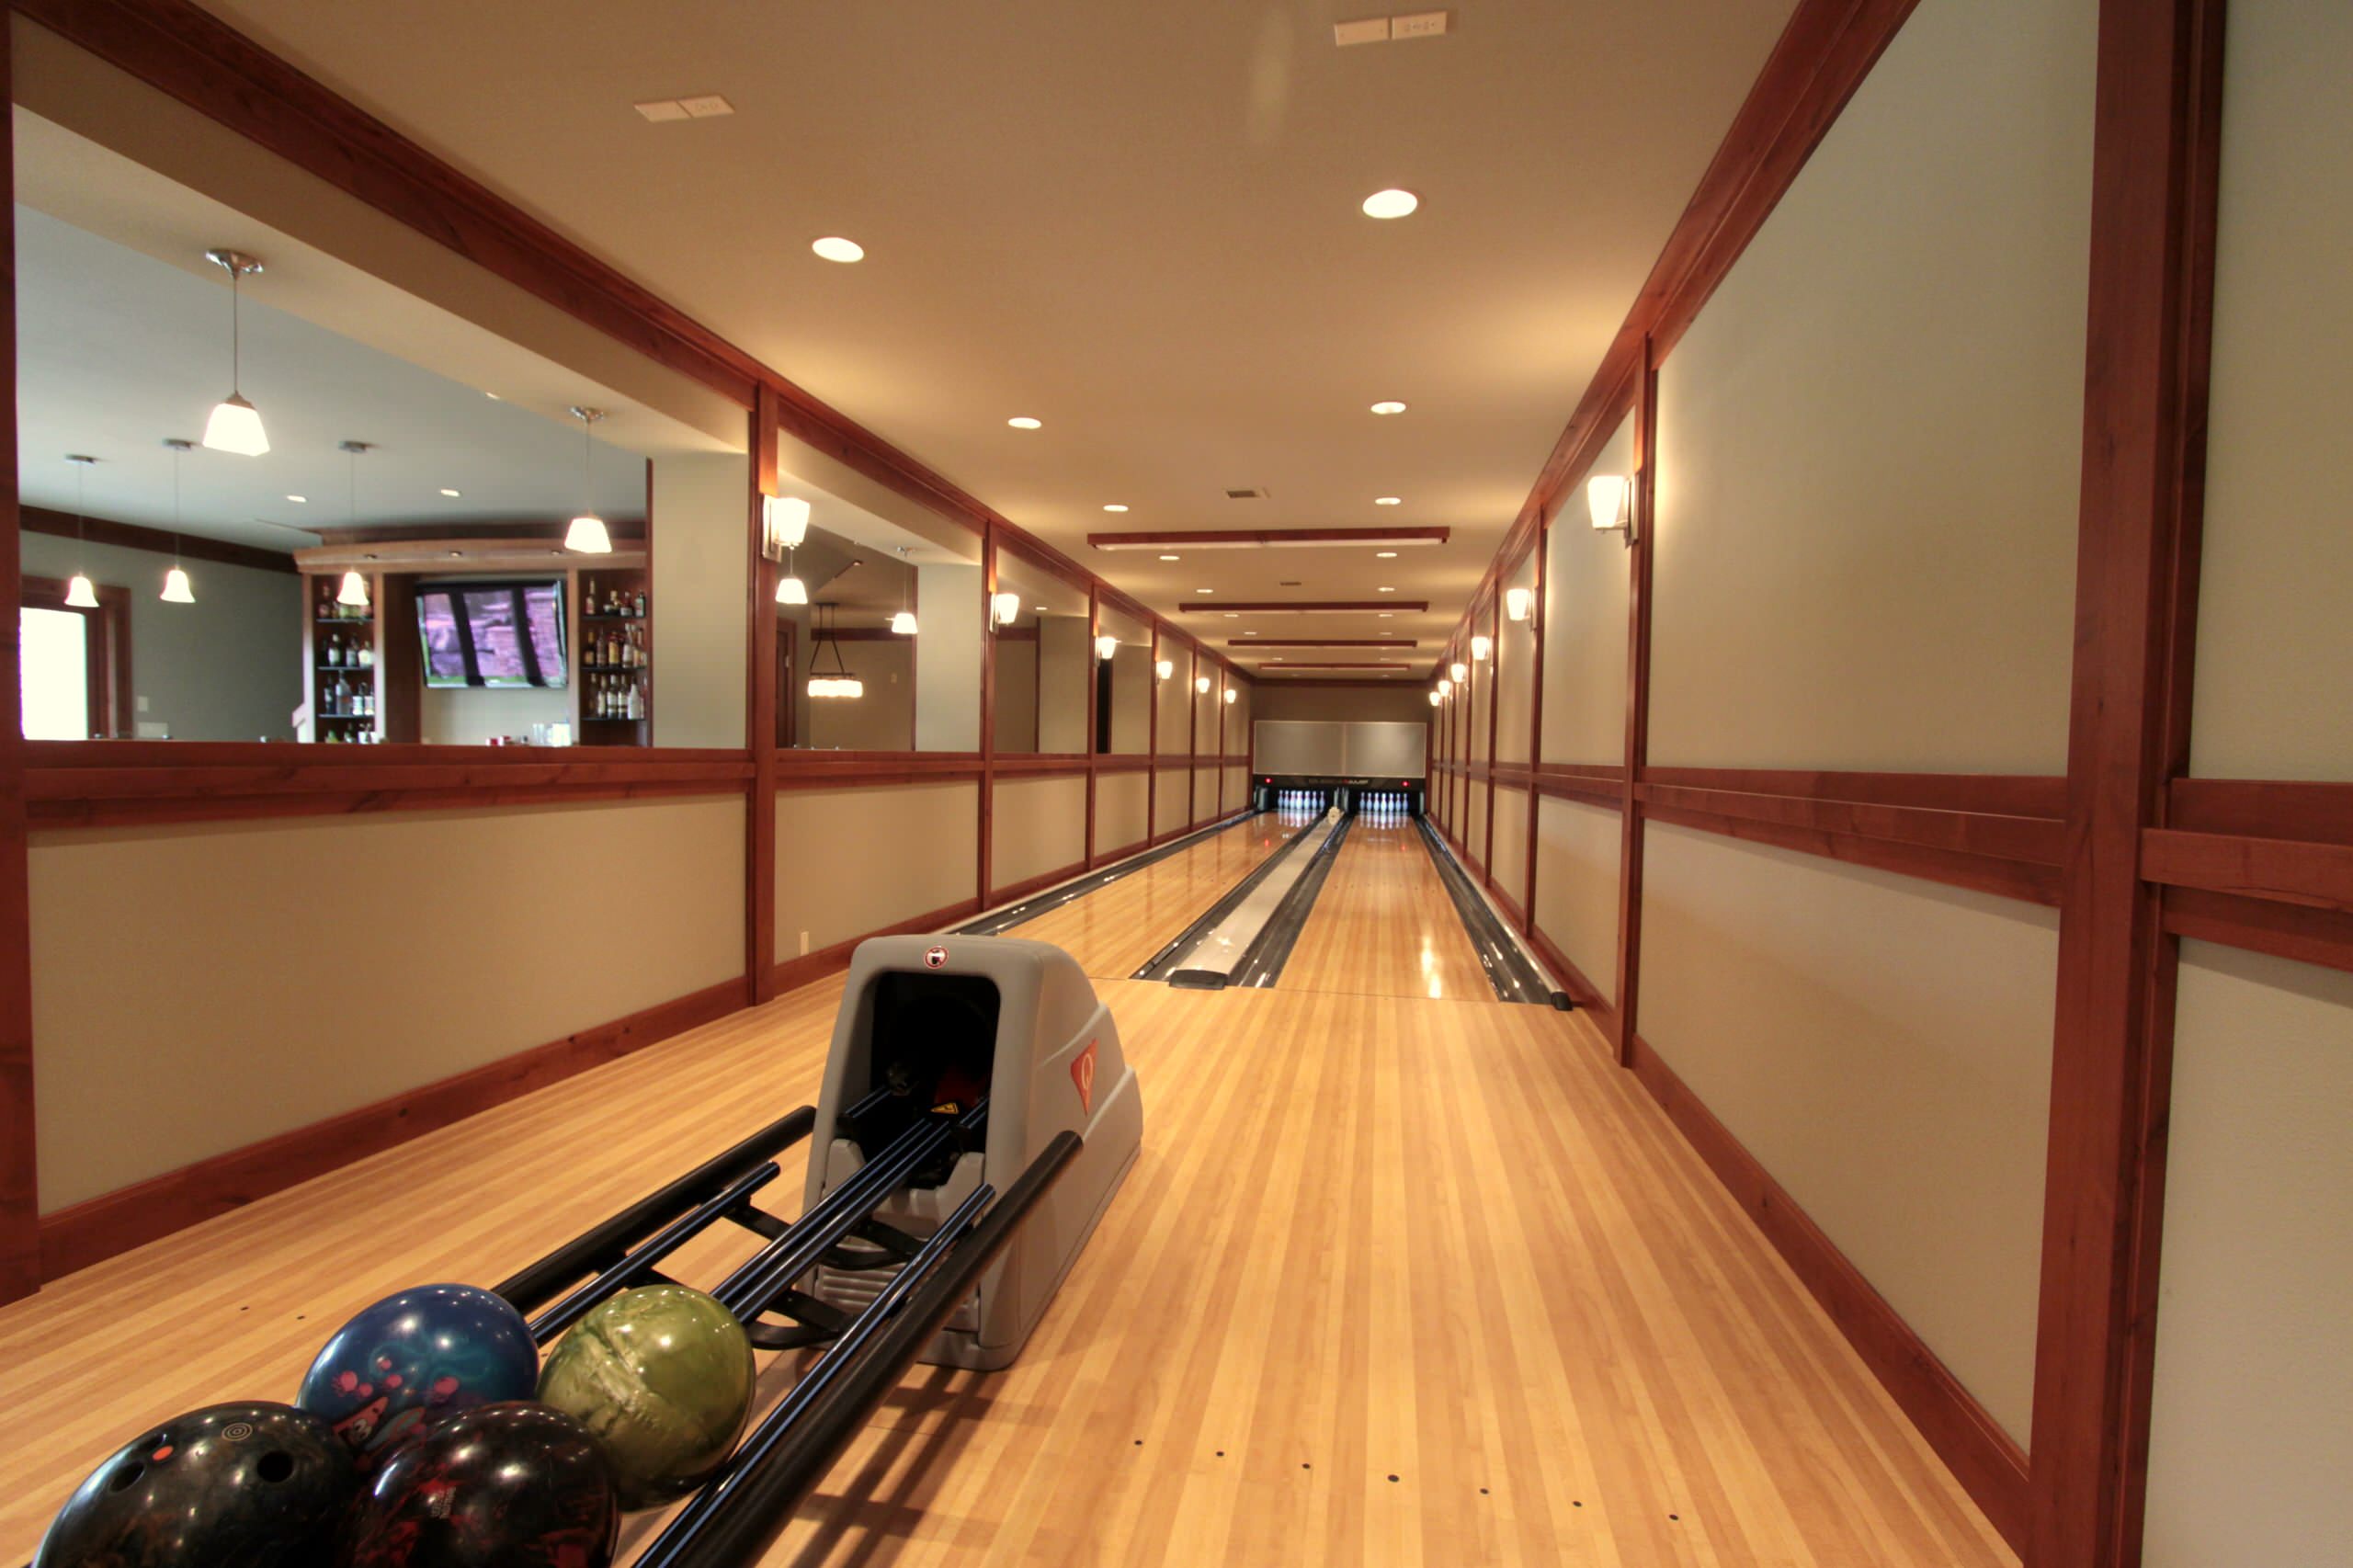 bowling alley